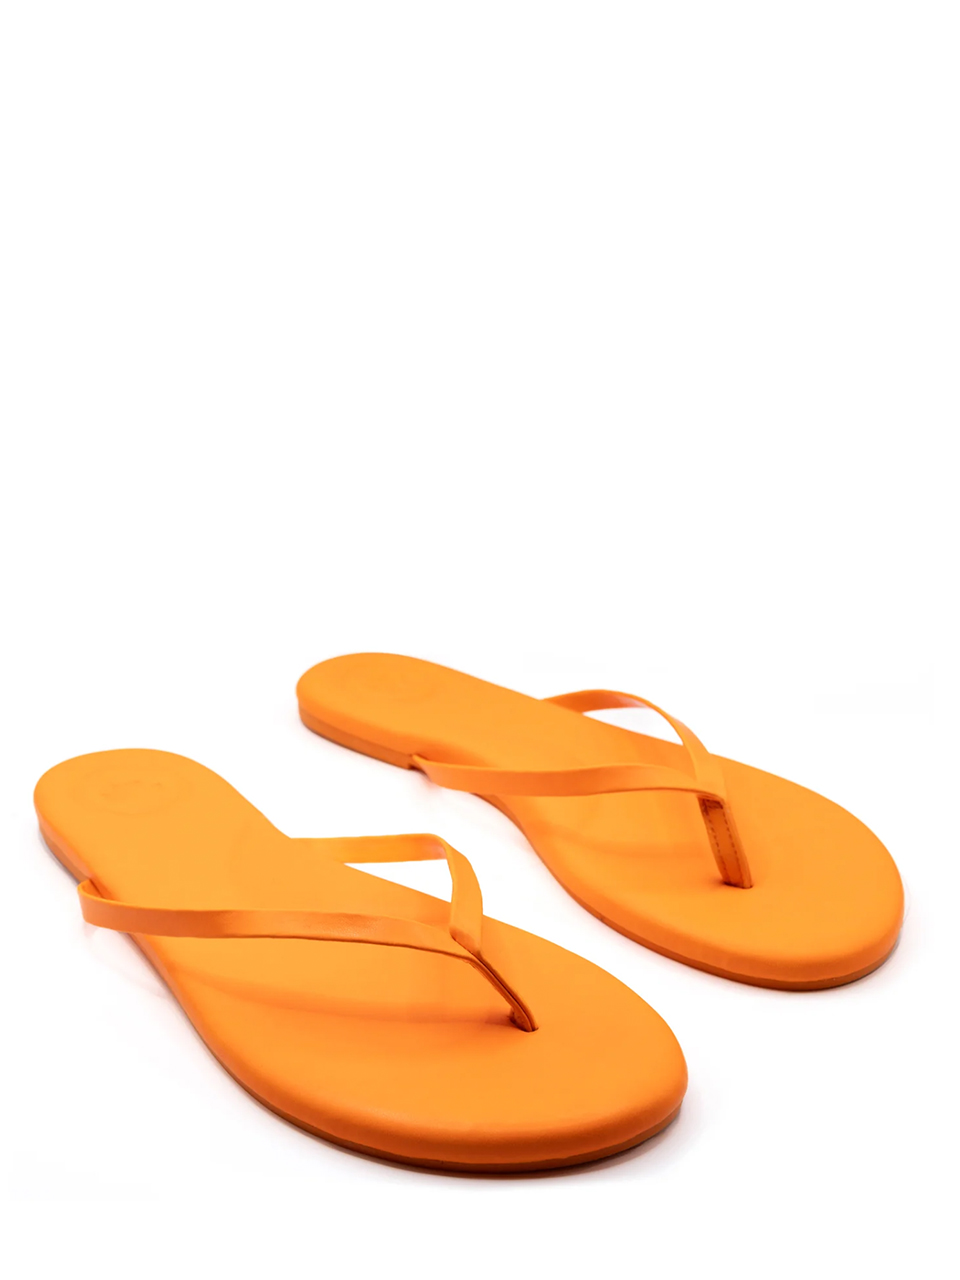 SOLEIL SEA Indie Classic Thin Strap Sandal in Sun Kiss Orange Front Side View 